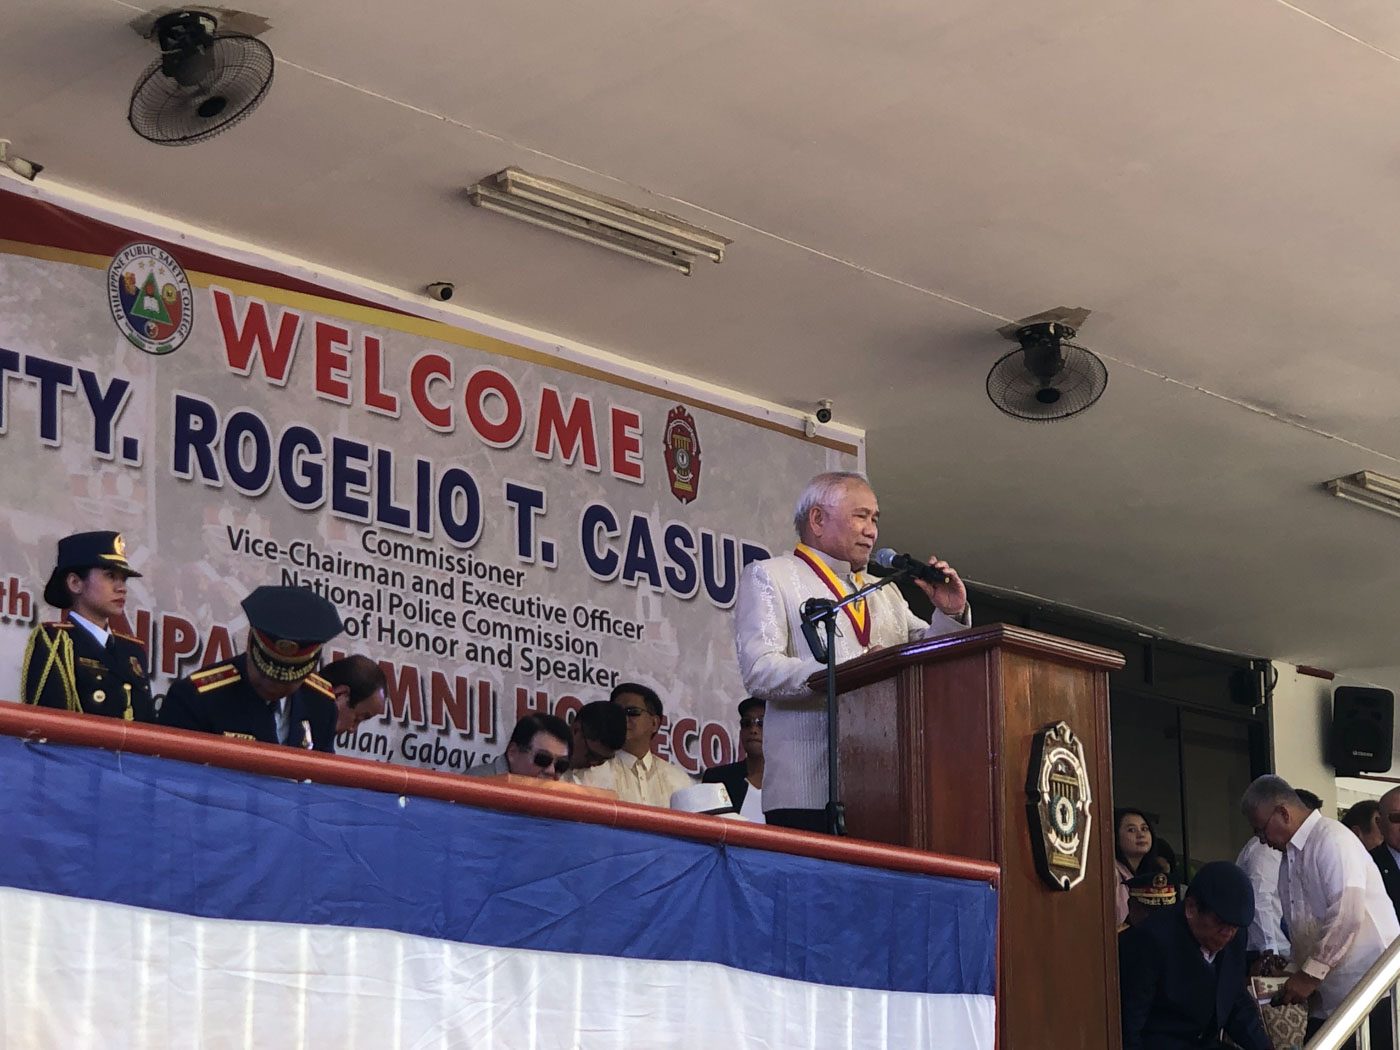 VIP. Guest of honor Napolcom Vice Chairman Rogelio Casurao delivers his speech at the PNP Academy Homecoming 2019. Photo by Sofia Tomacruz/Rappler 